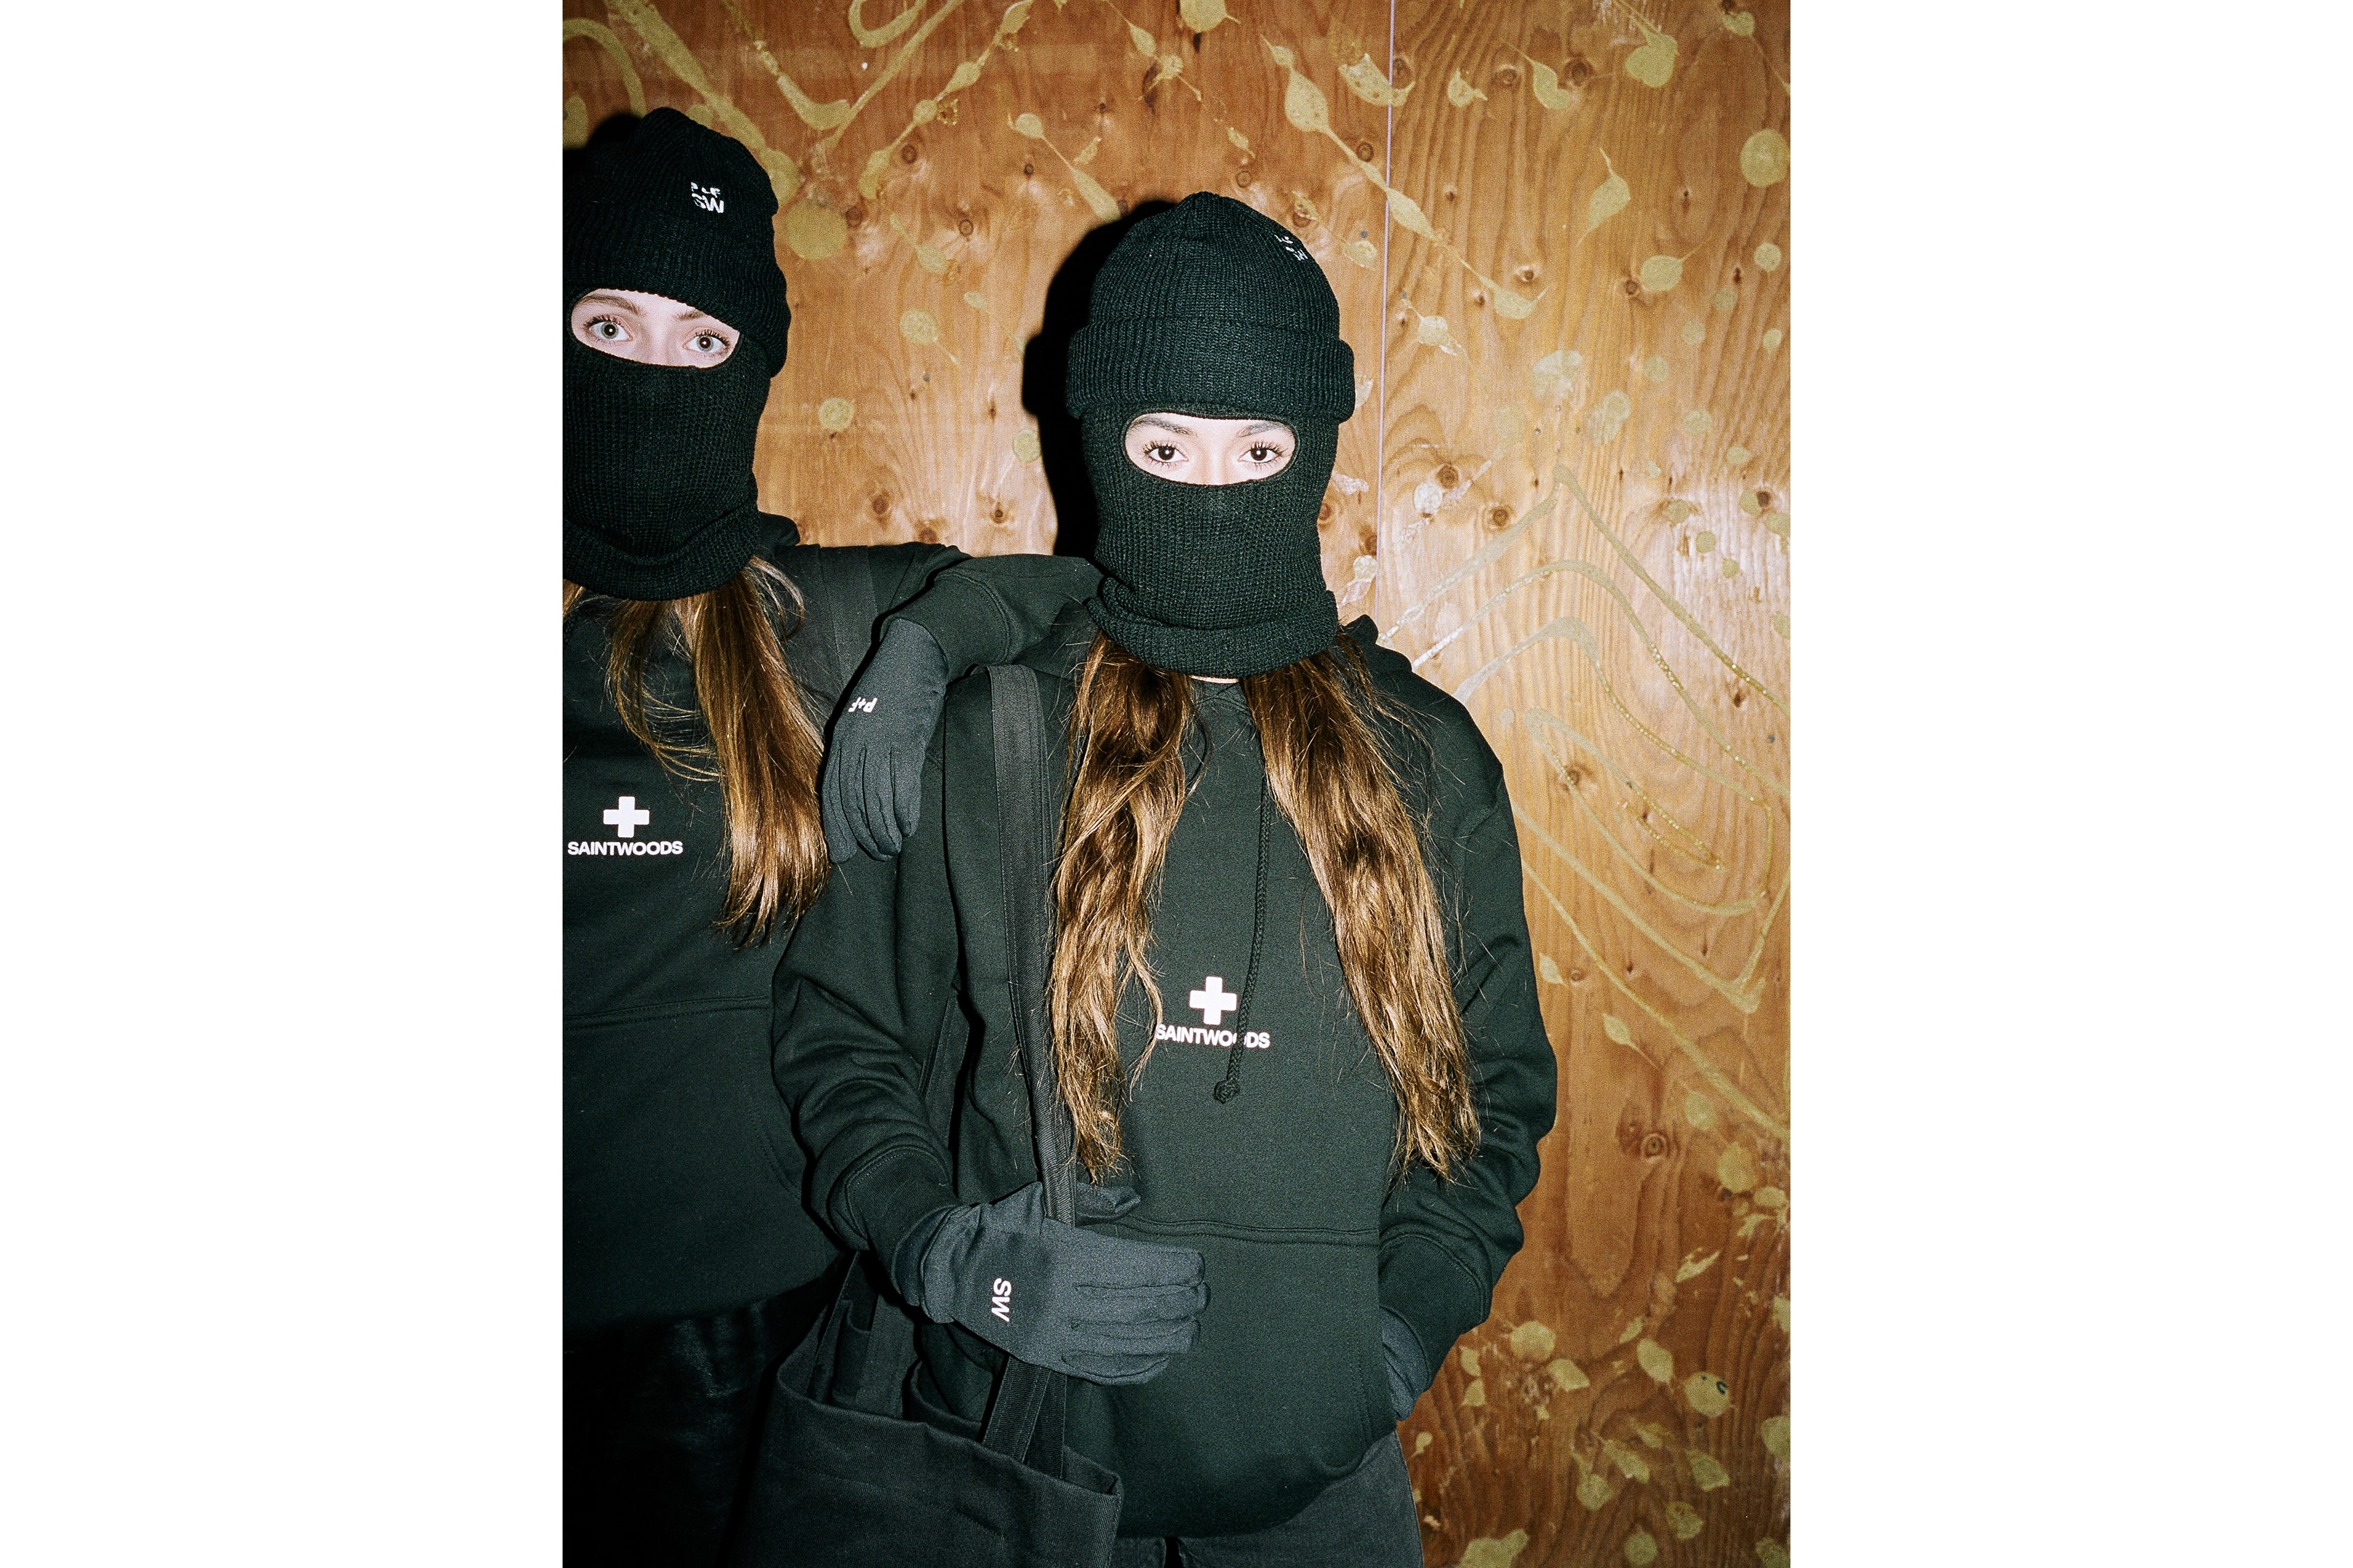 Places+Faces x Saintwoods Capsule Collection Lookbook Streetwear Limited Edition Collaboration